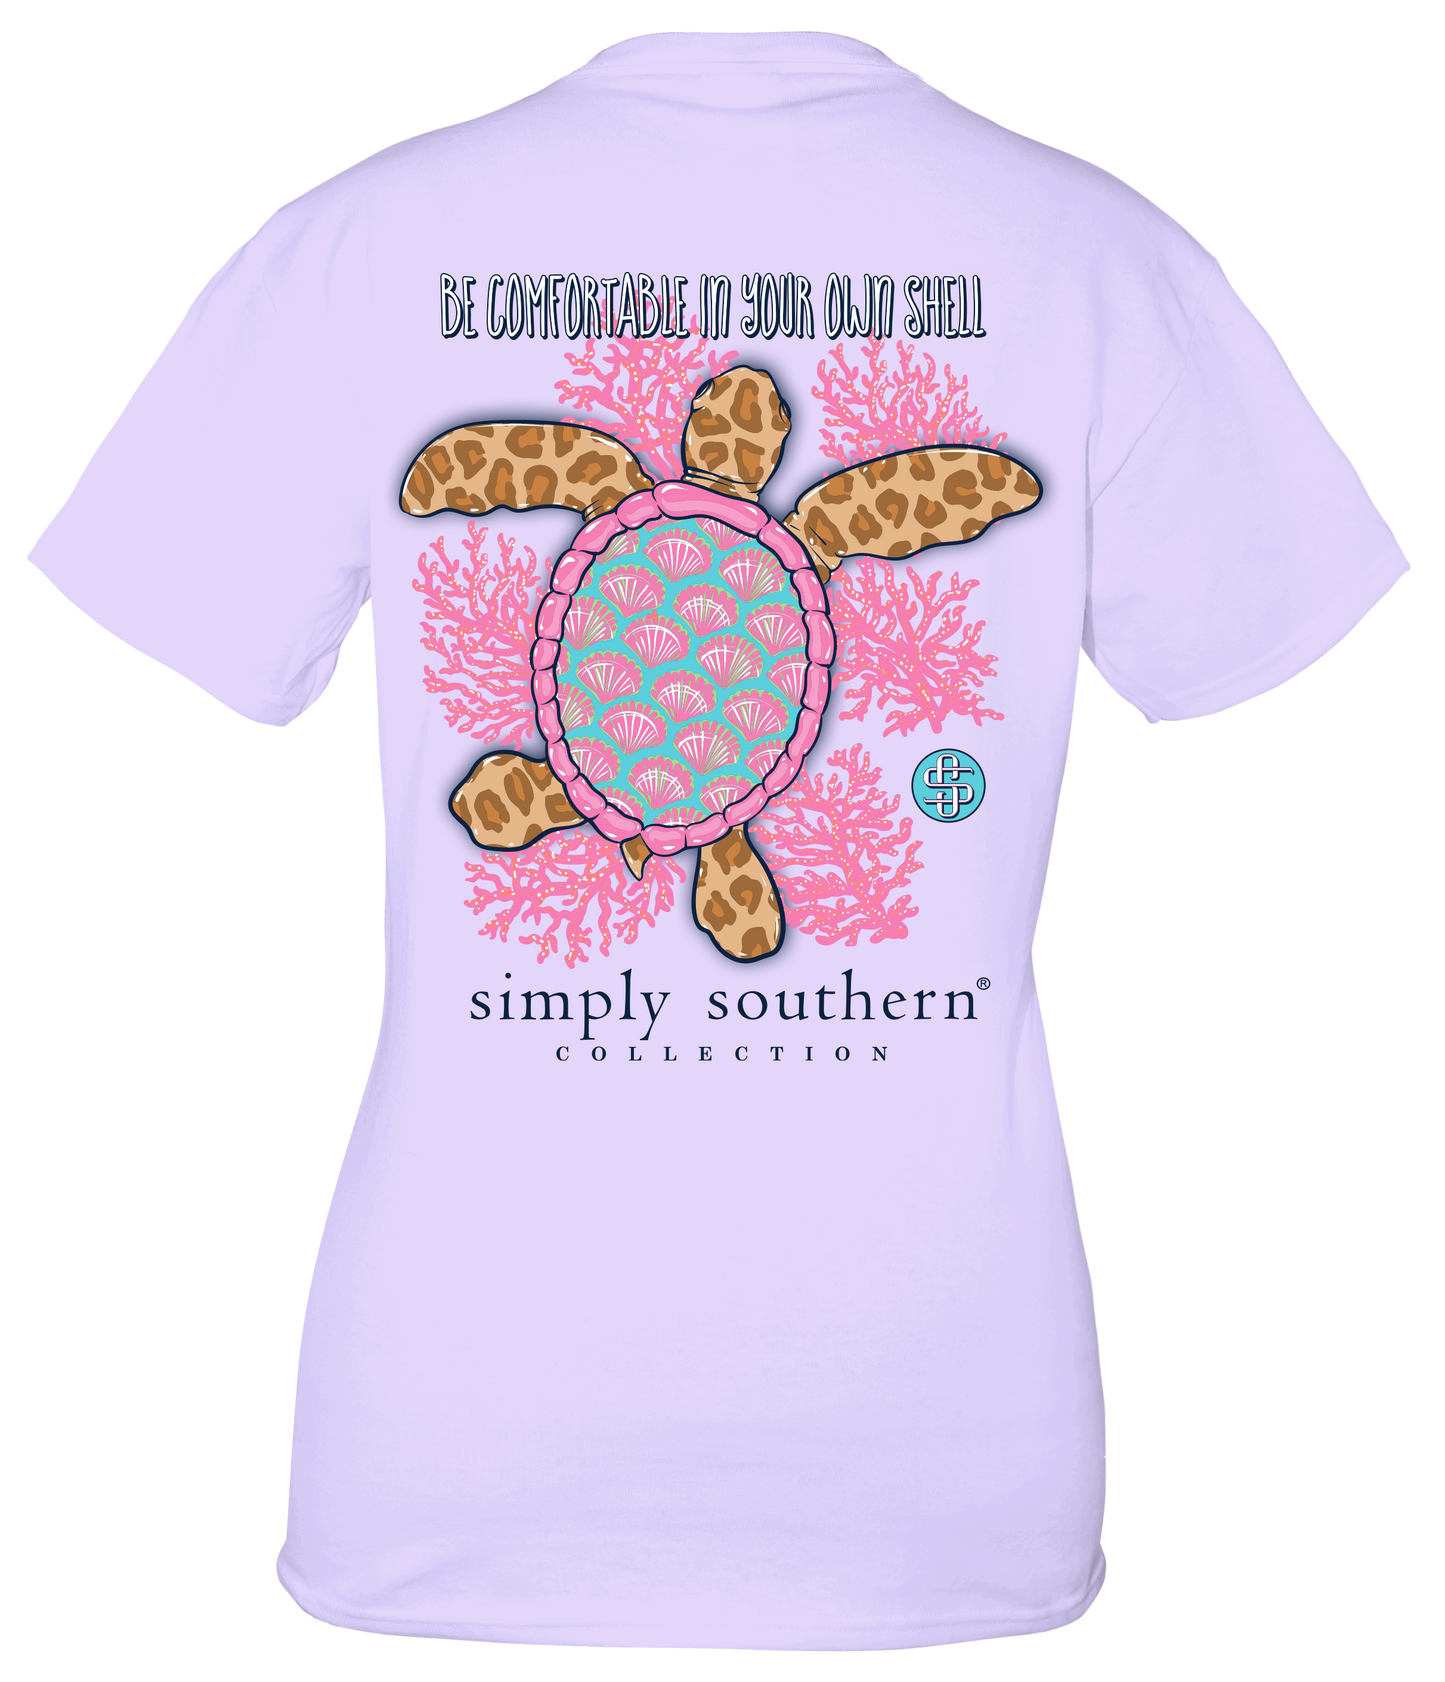 "Be Comfortable In Your Own Shell" Shirt